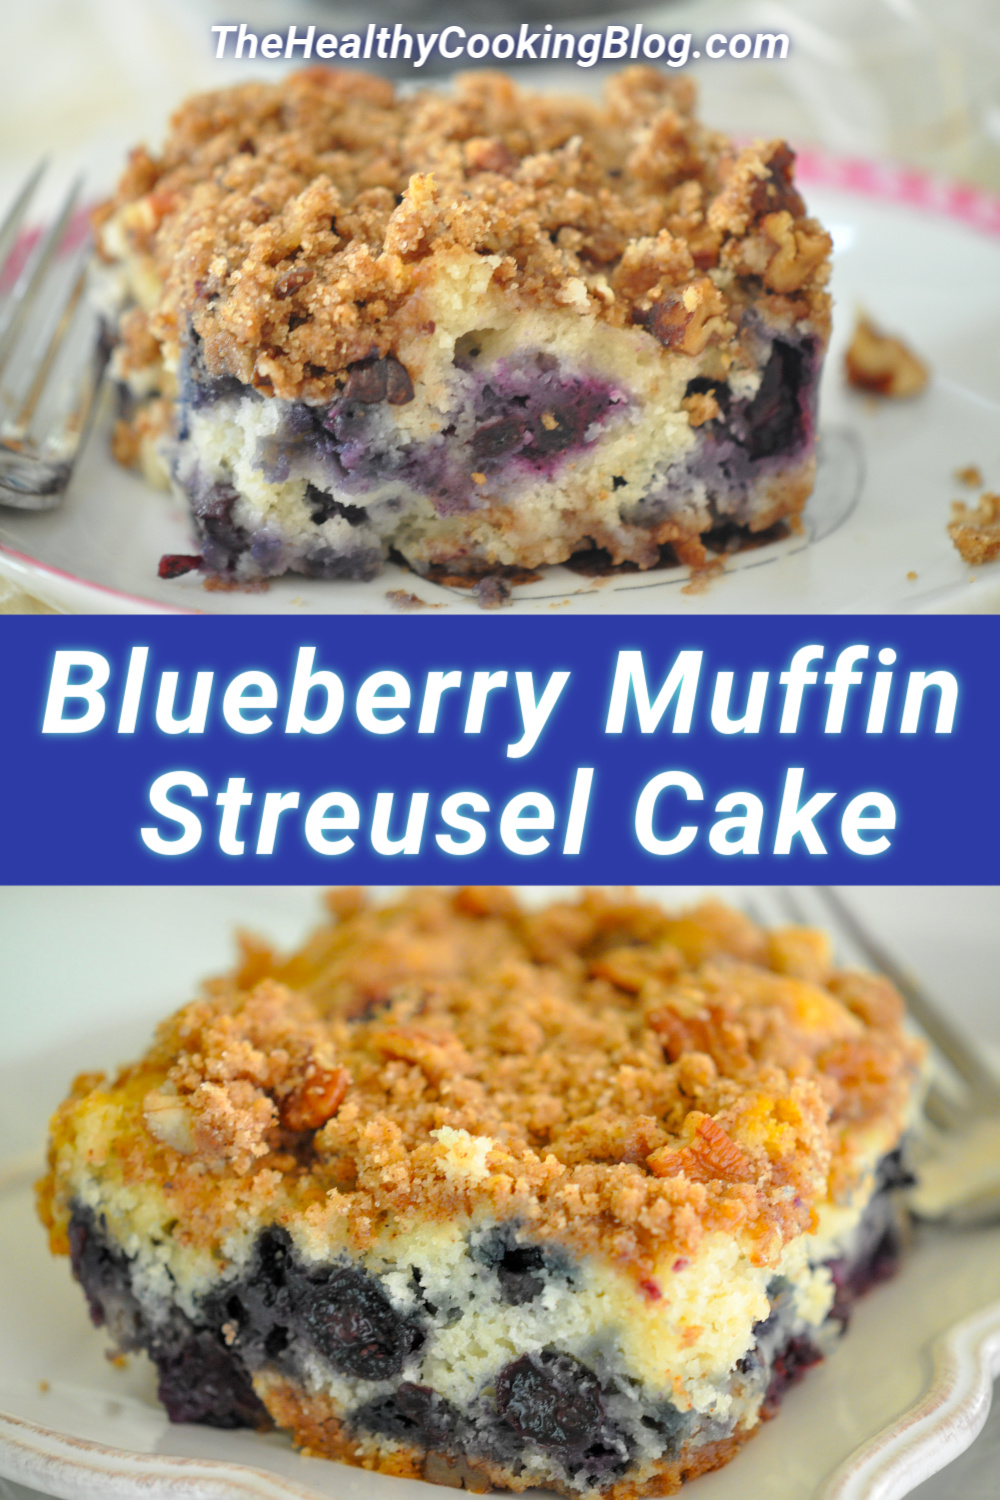 Blueberry Muffin Streusel Cake - #1 Best Blueberry Coffee Cake Recipe